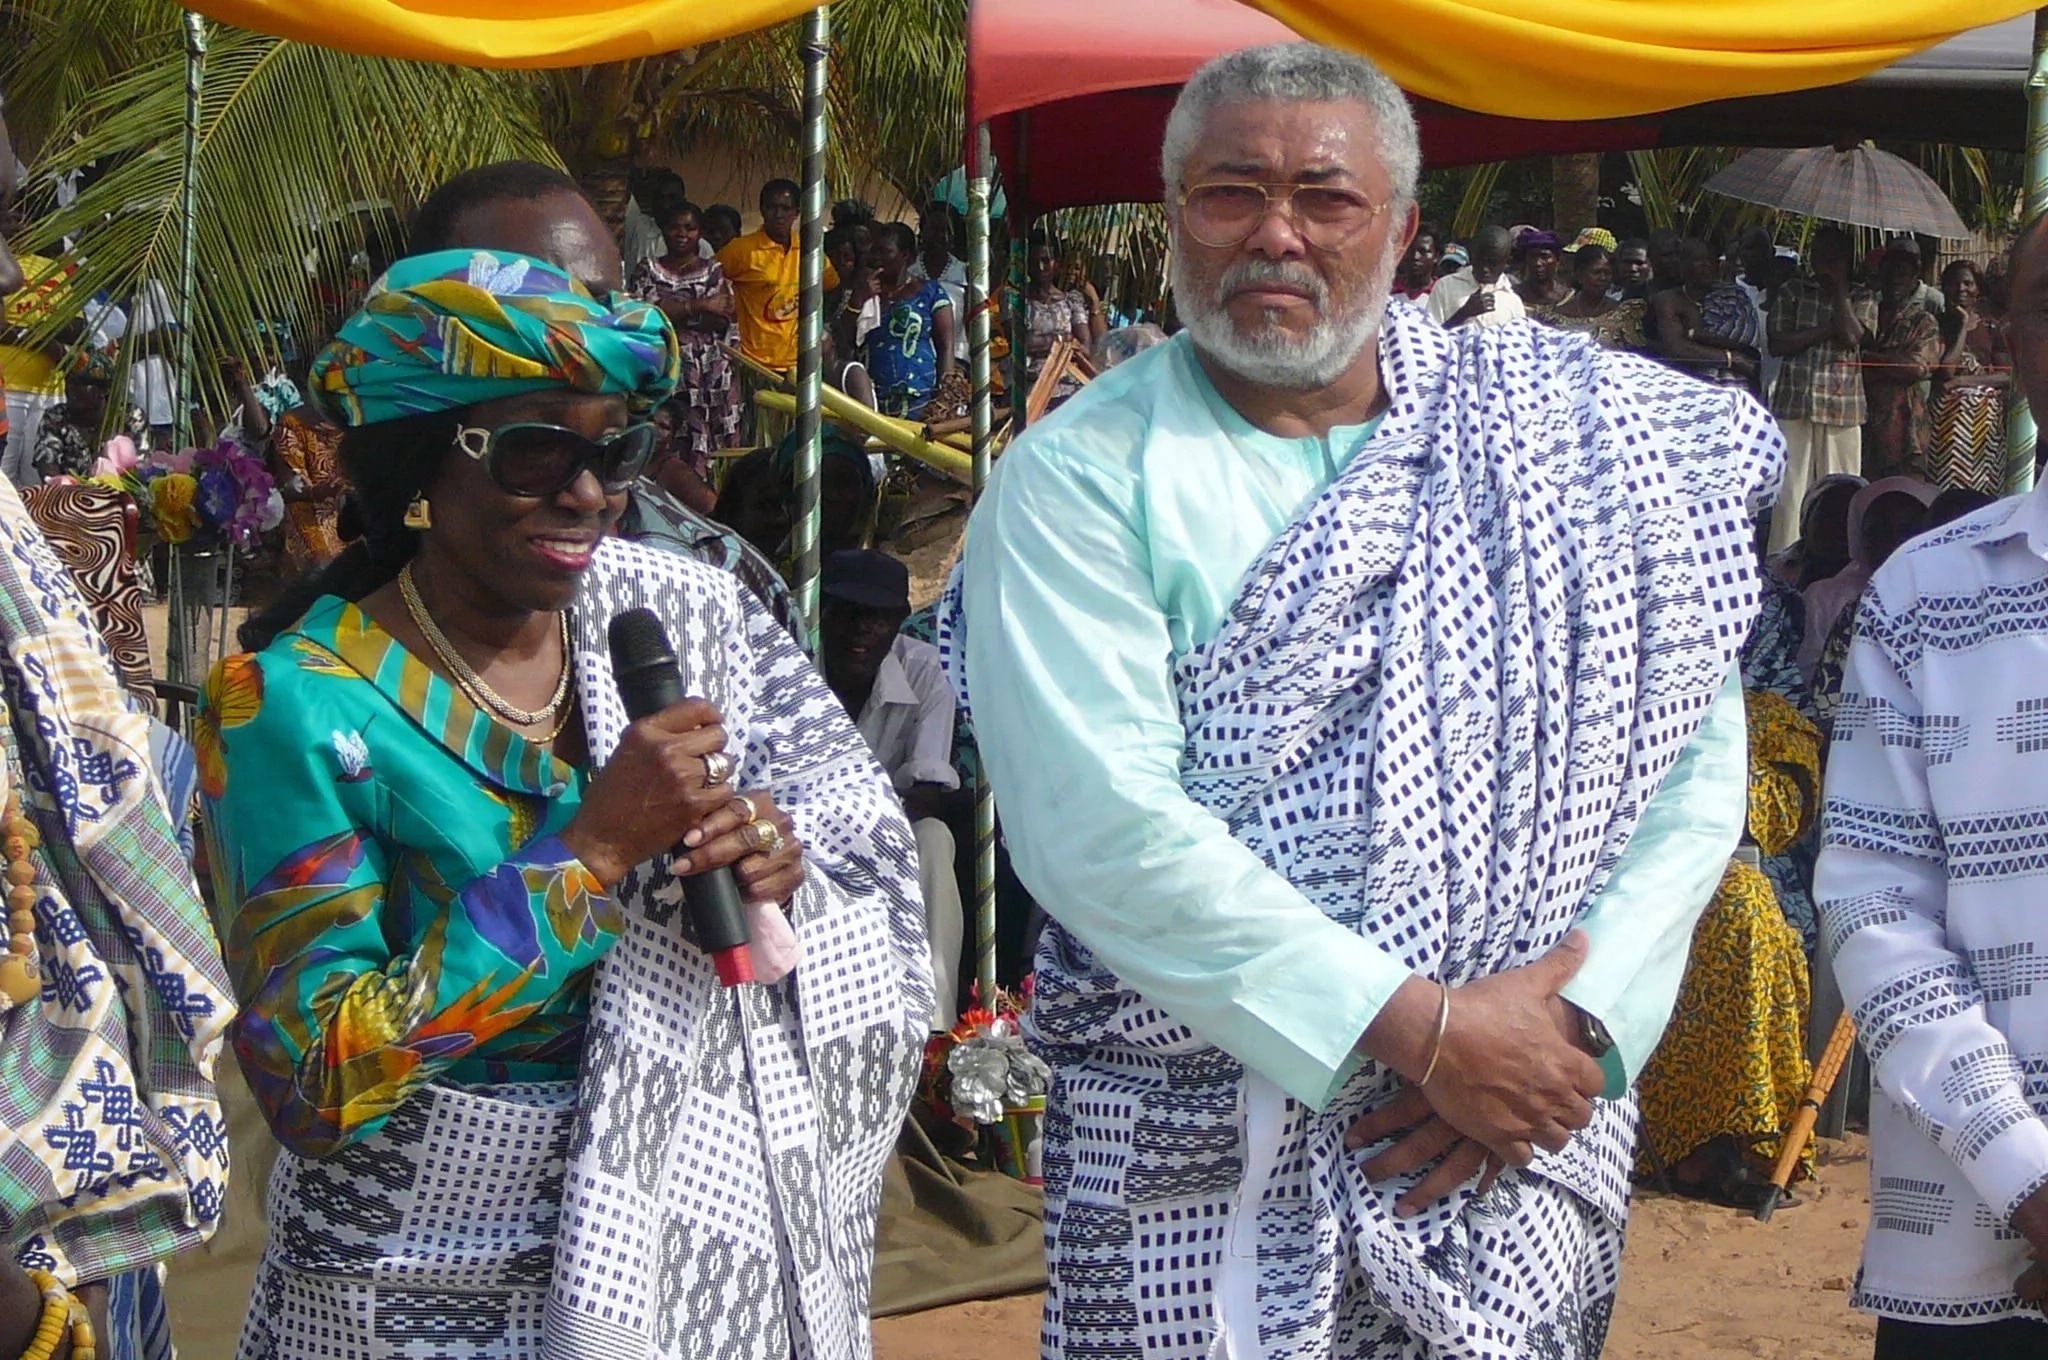 7 times JJ Rawlings proved he will make a handsome king